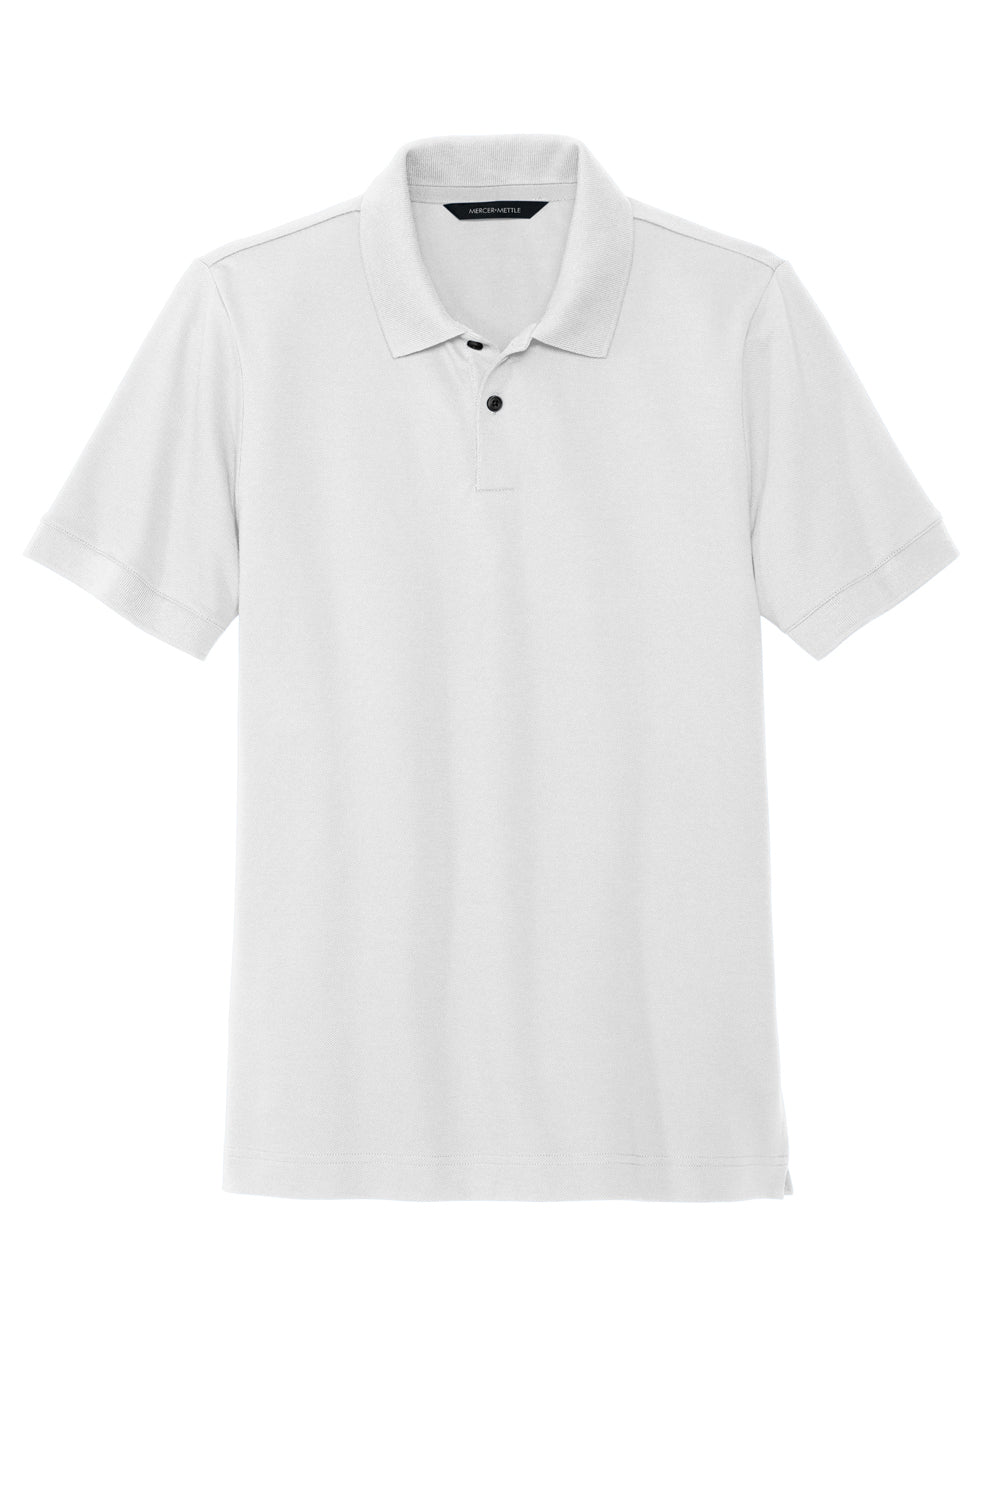 Mercer+Mettle MM1000 Stretch Pique Short Sleeve Polo Shirt White Flat Front